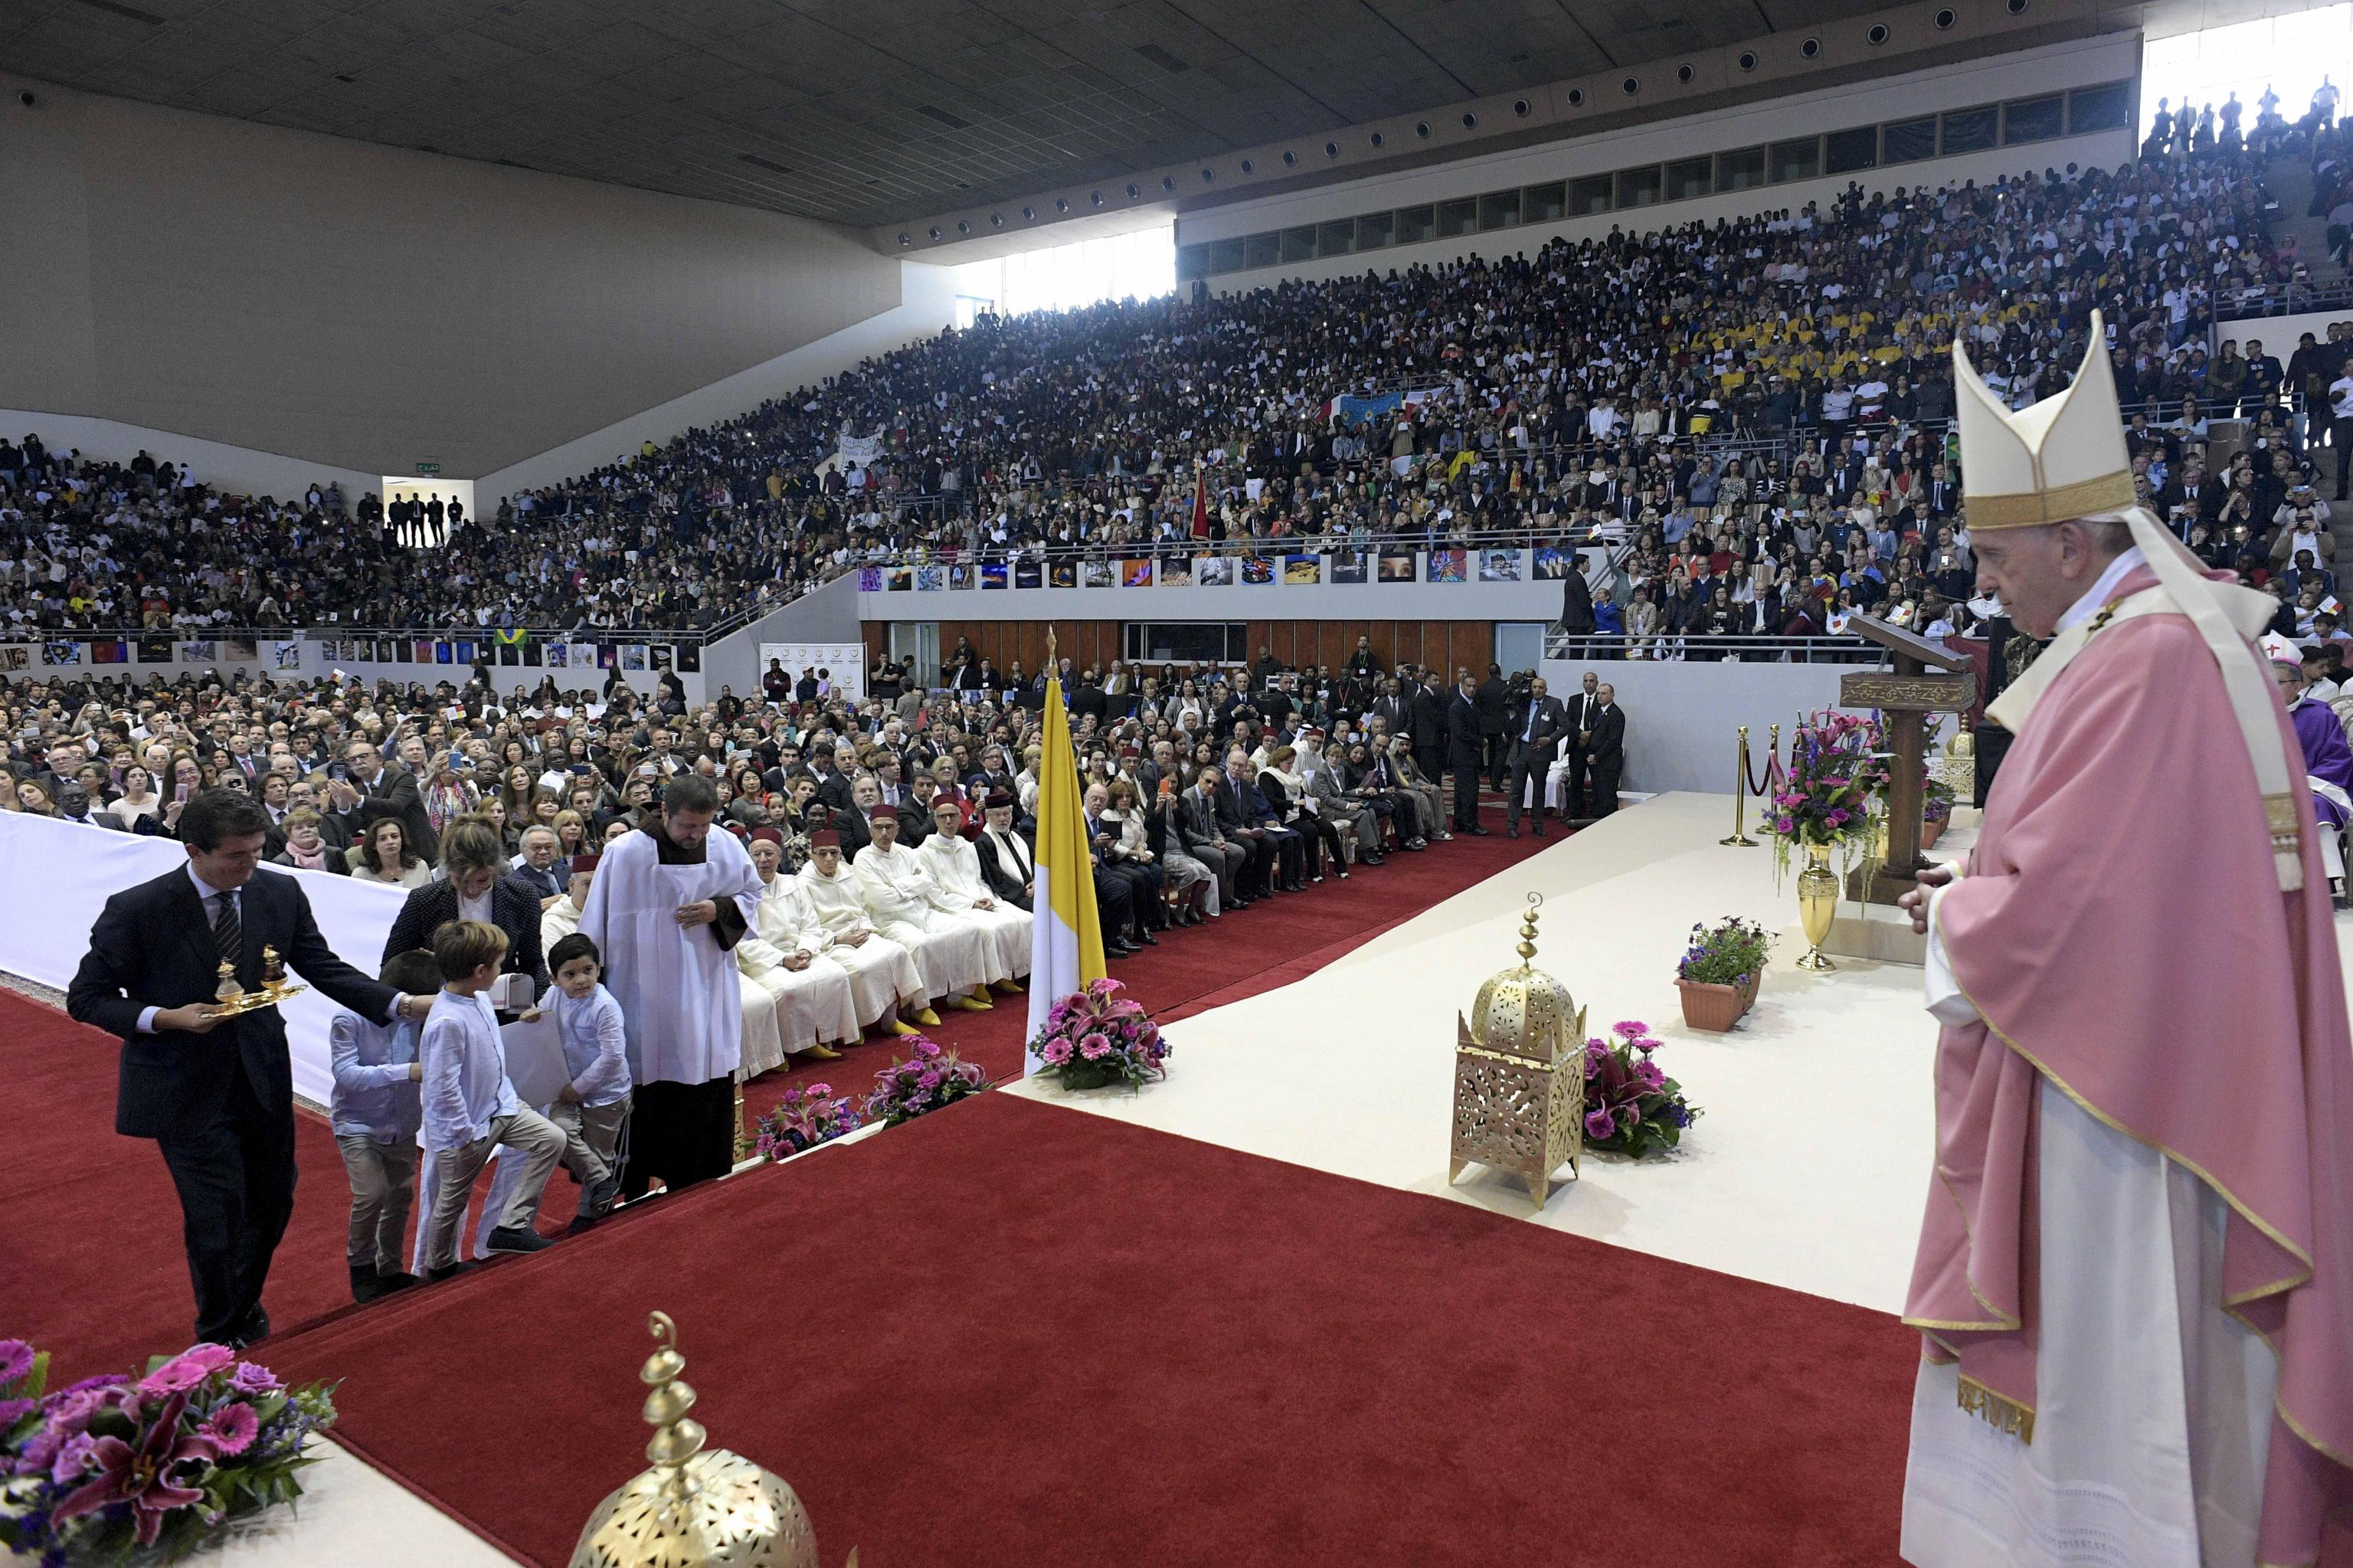 epa07476729 A handout picture provided by the Vatican Media shows Pope Francis during a Mass at Prince Moulay Abdellah Stadium in Rabat, Morocco, 31 March 2019. Pope Francis is on the apostolic journey to Morocco to highlight the North African nation's tradition of Christian-Muslim ties.  EPA/VATICAN MEDIA HANDOUT  HANDOUT EDITORIAL USE ONLY/NO SALES